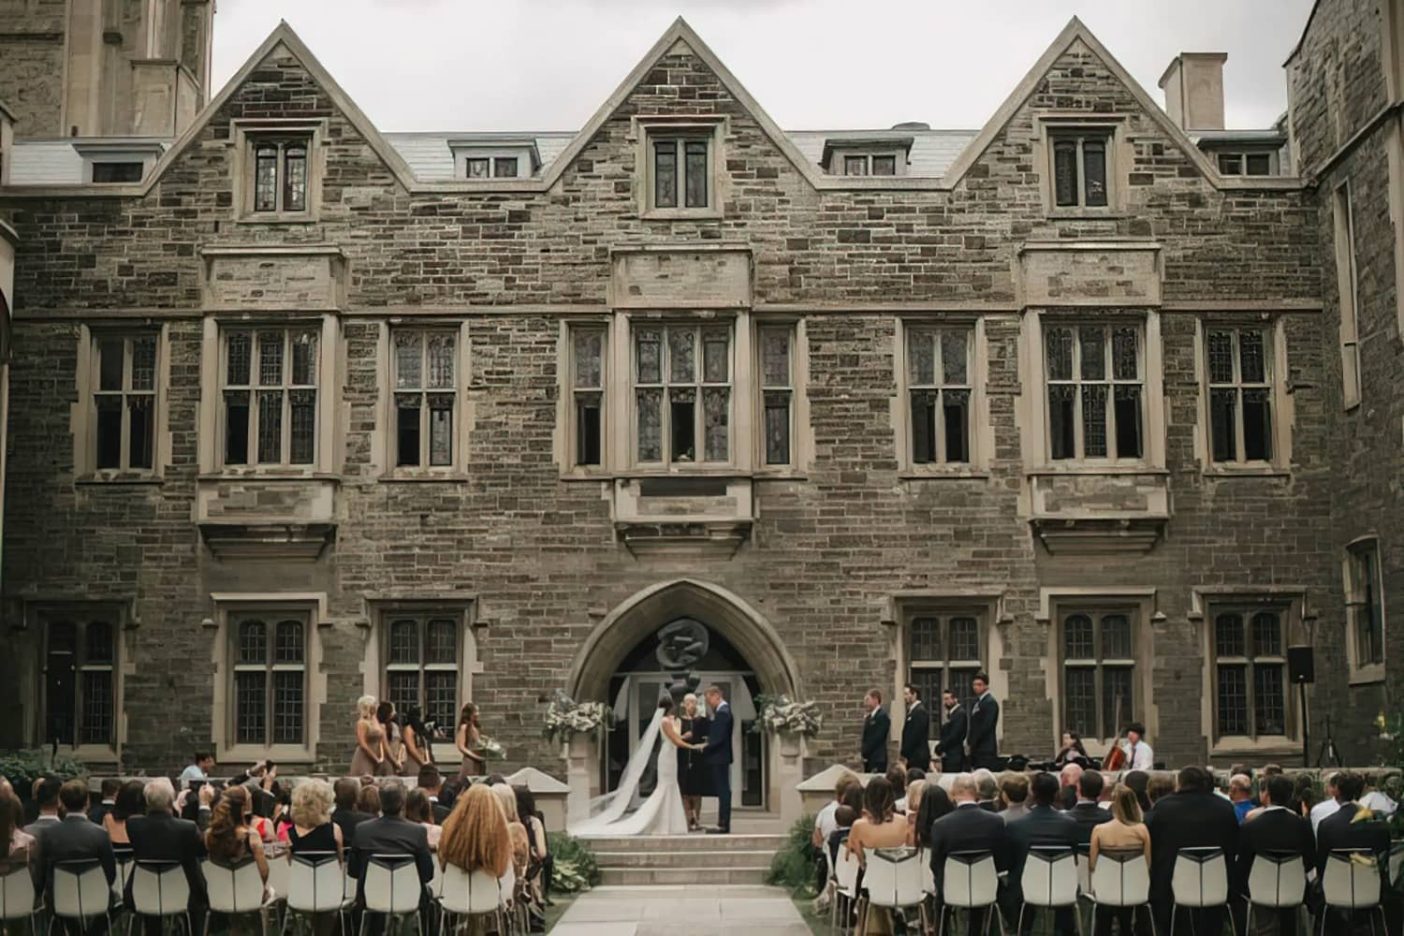 A couple getting married at the Hart House (University of Toronto)